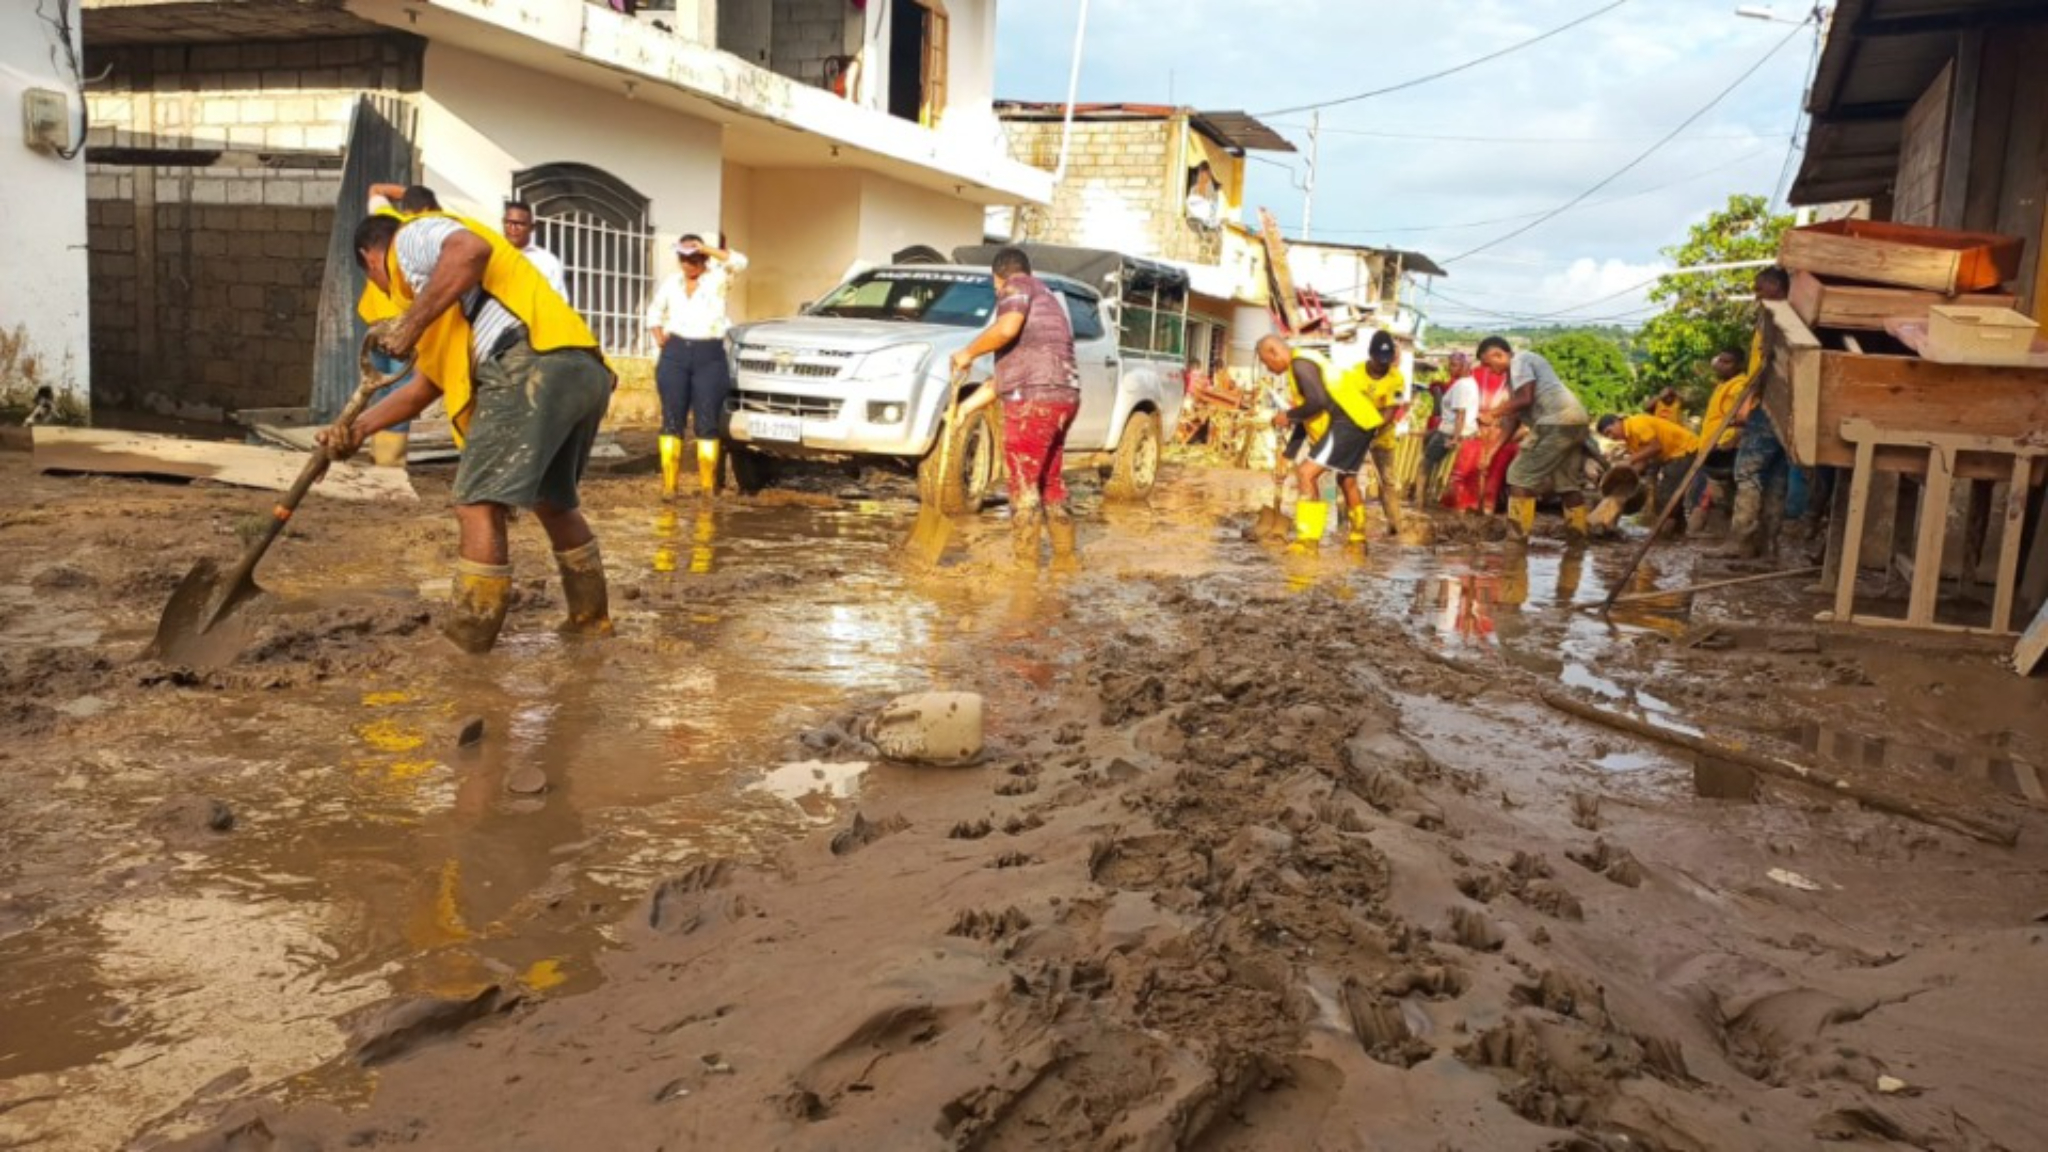 Latterday Saint Volunteers Rally to Clean up Flooding in Ecuador